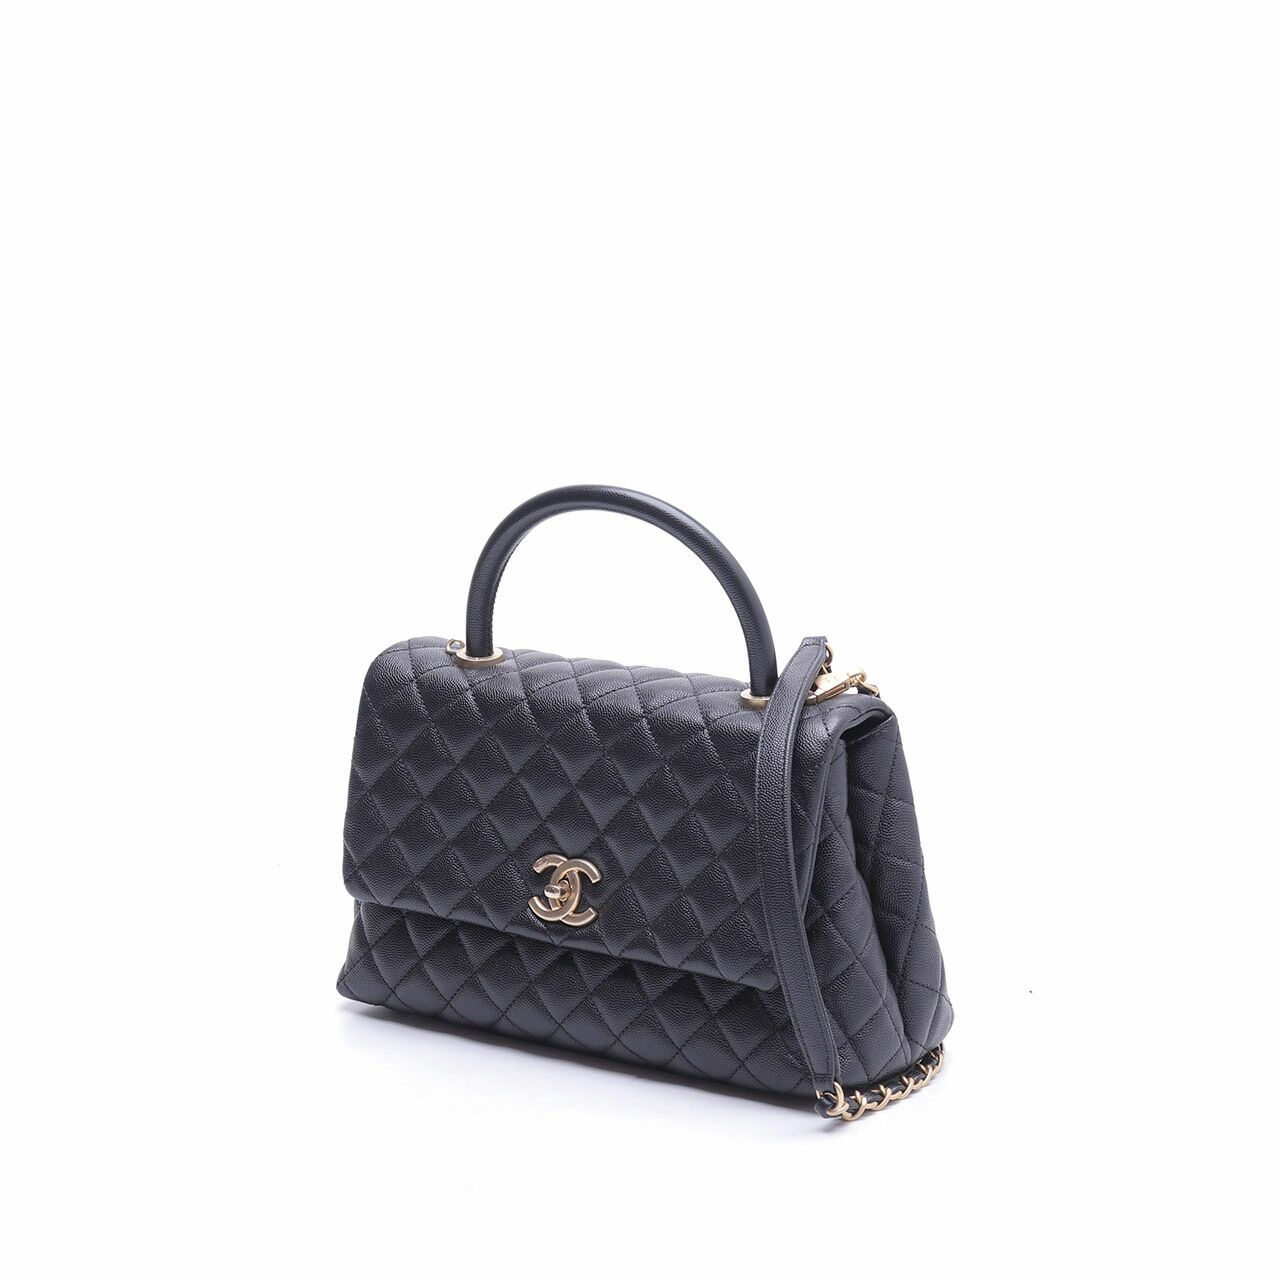 Chanel Grained Caviarskin & Gold-Tone Metal Black Flap bag with Handle